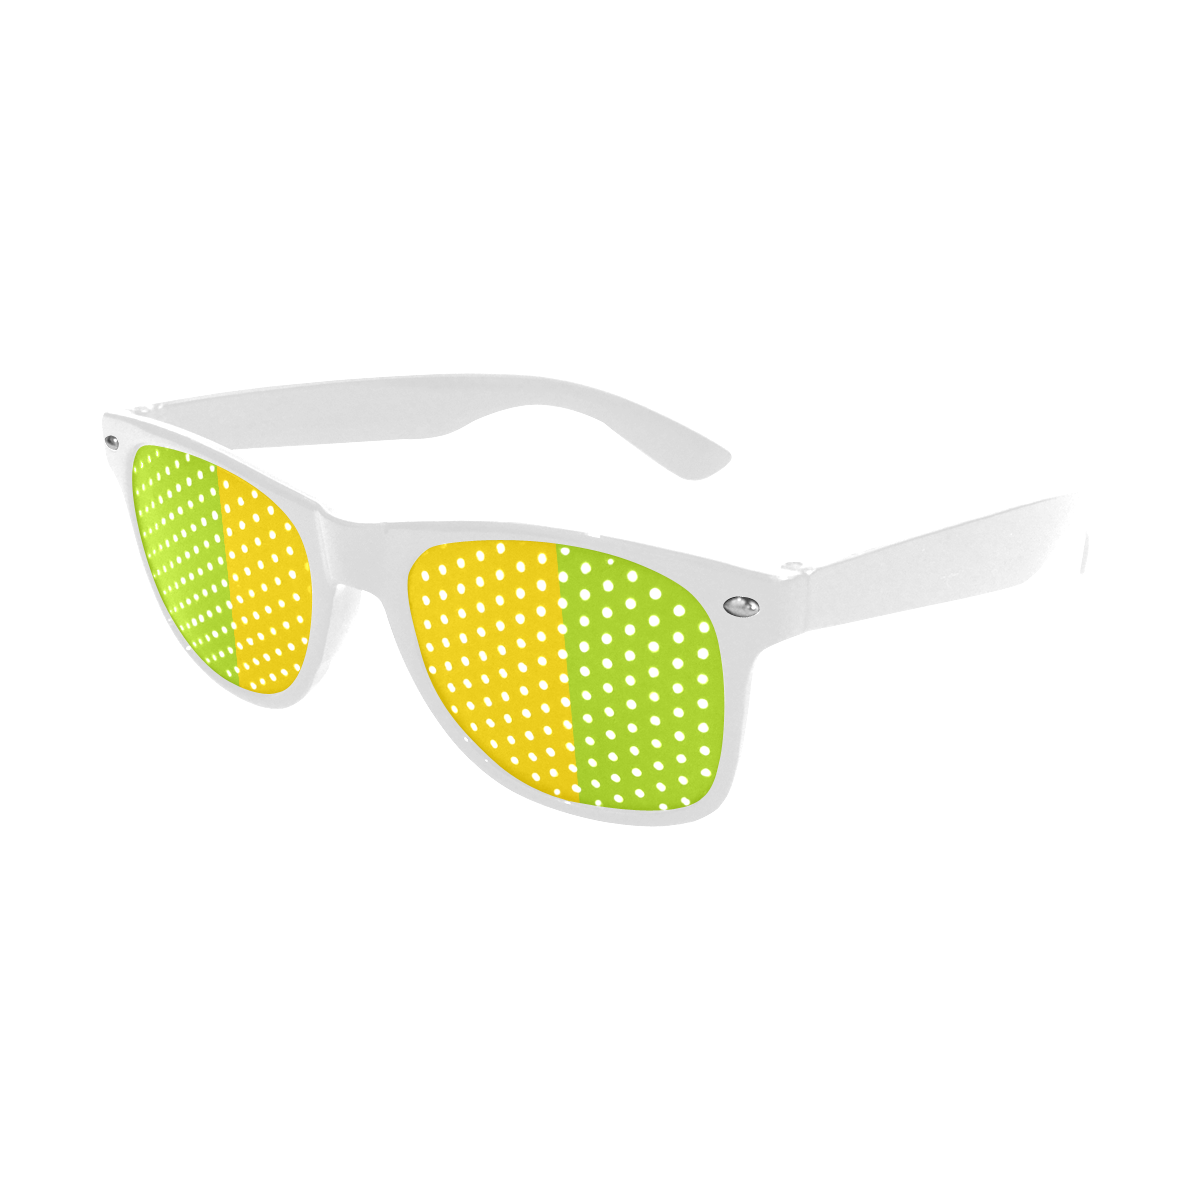 Only two Colors: Sun Yellow - Spring Green Custom Goggles (Perforated Lenses)